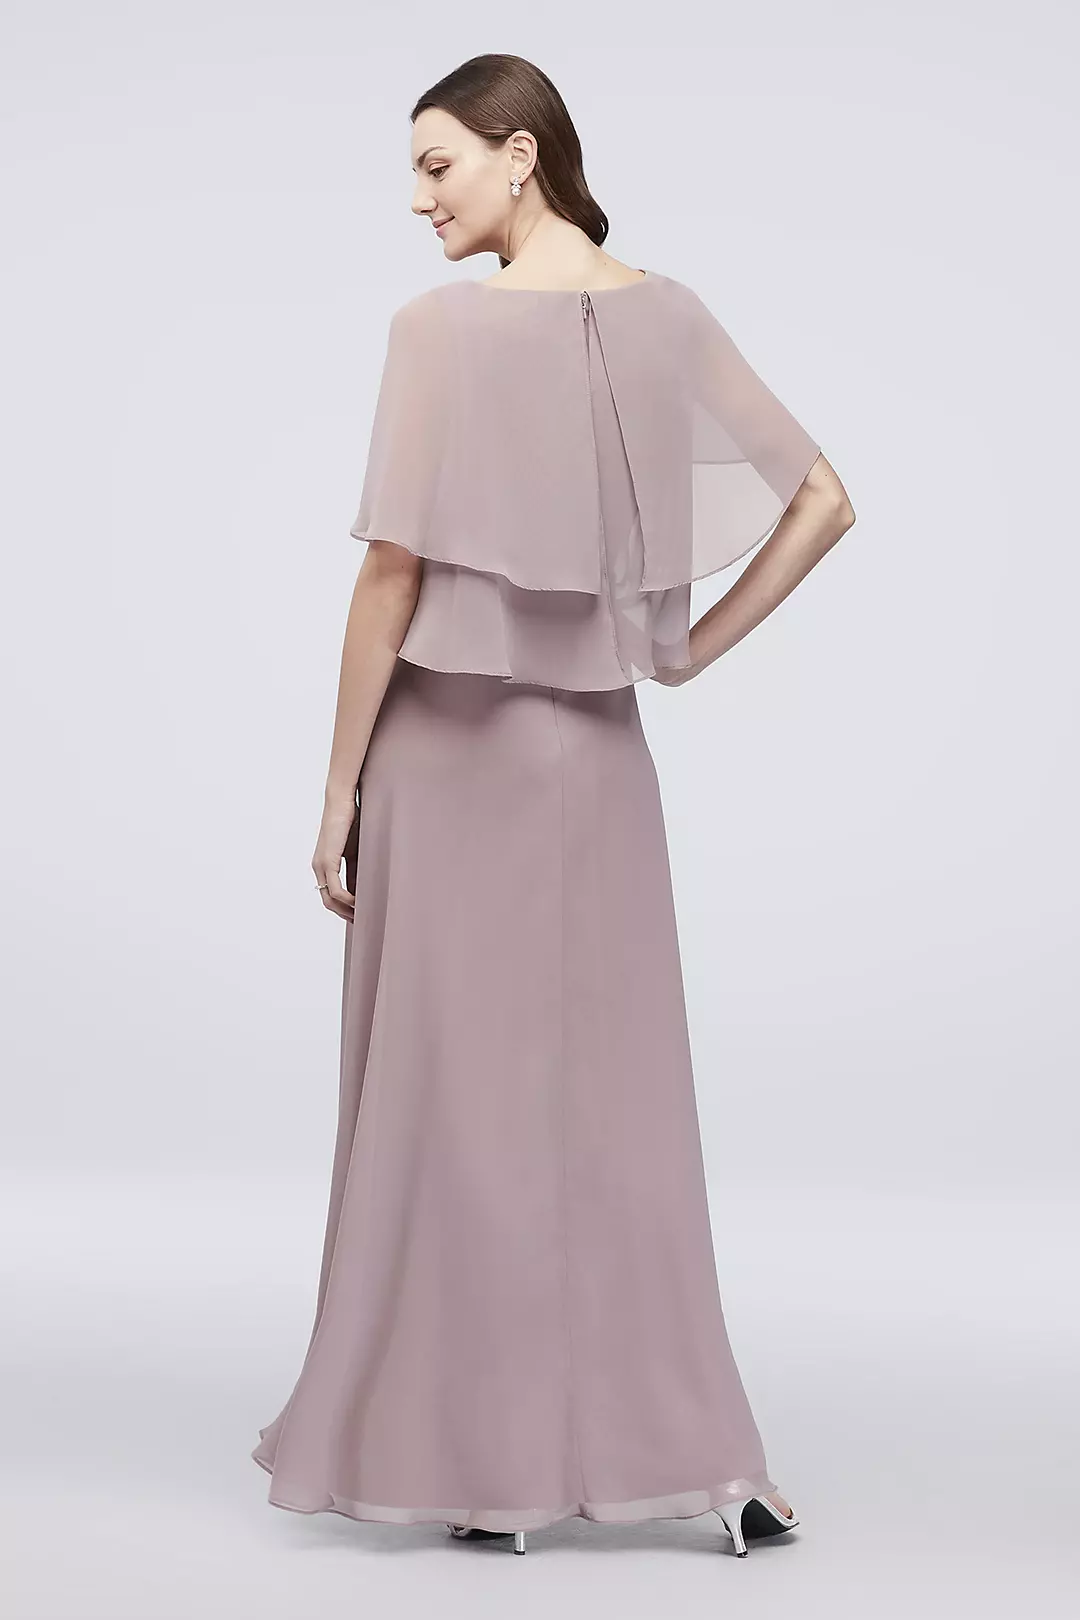 Chiffon Sheath Dress with Tiered Flutter Sleeves Image 2